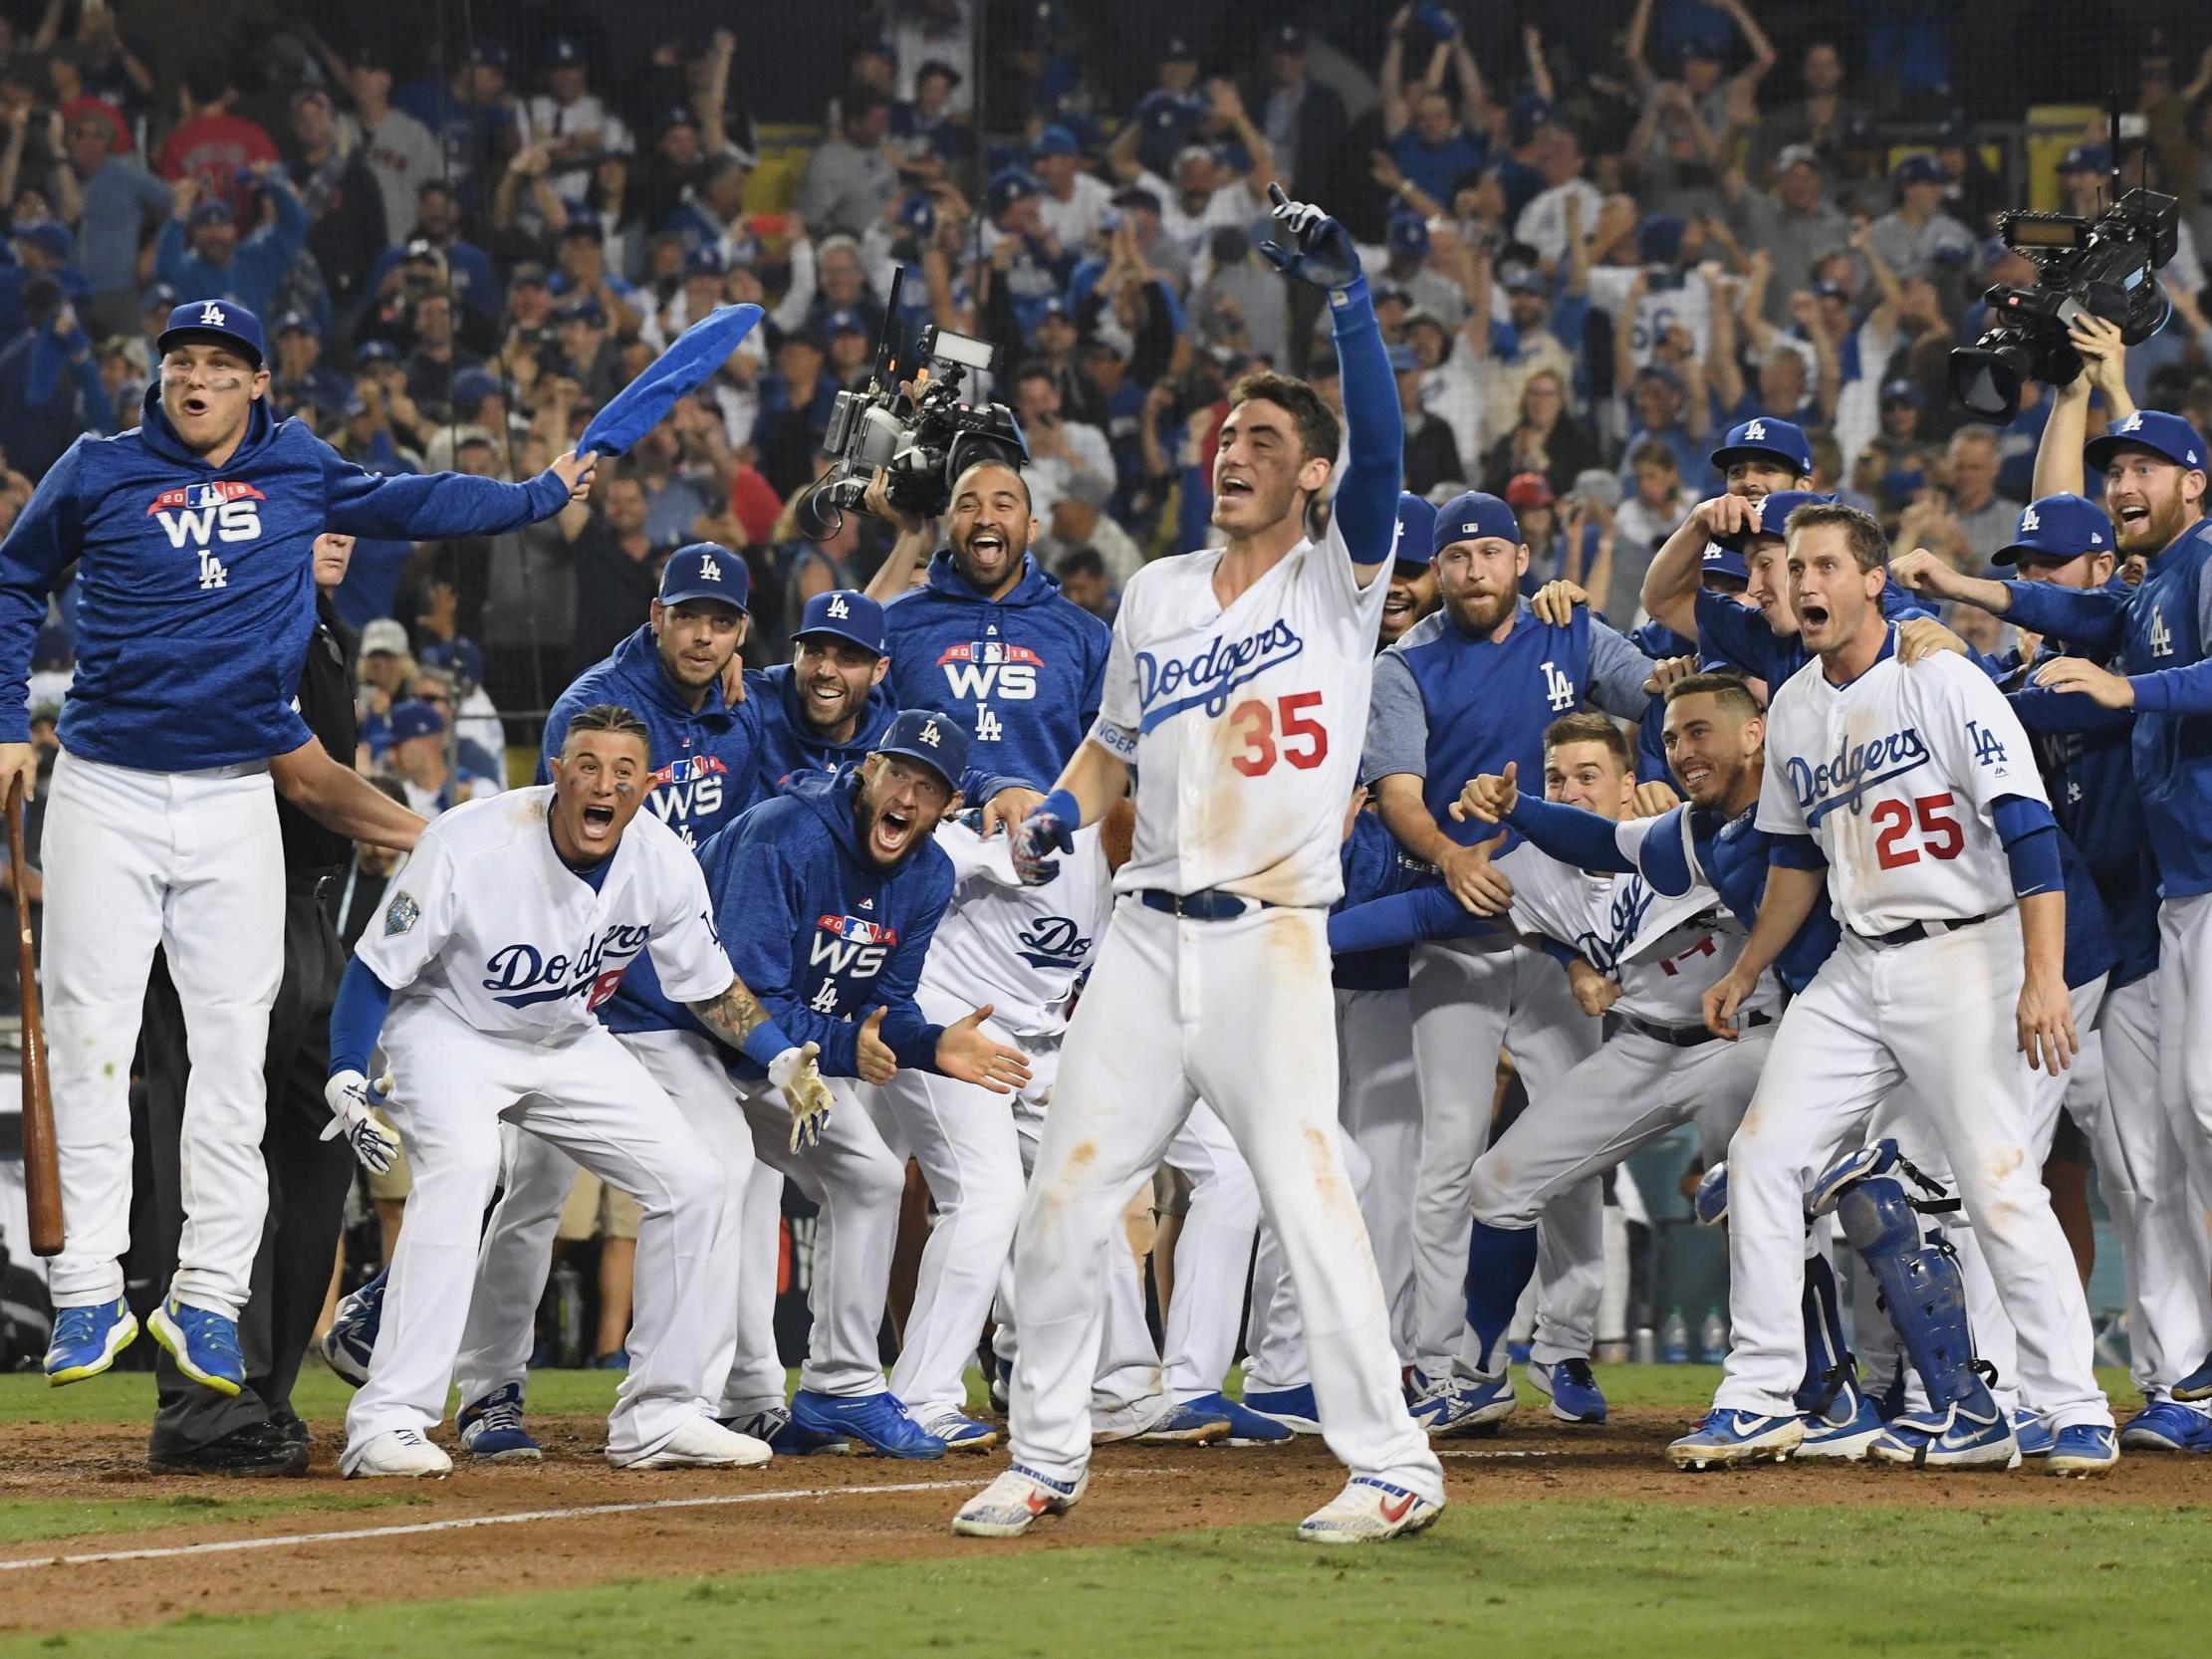 World Series: Dodgers walk off to beat Red Sox in longest game ever